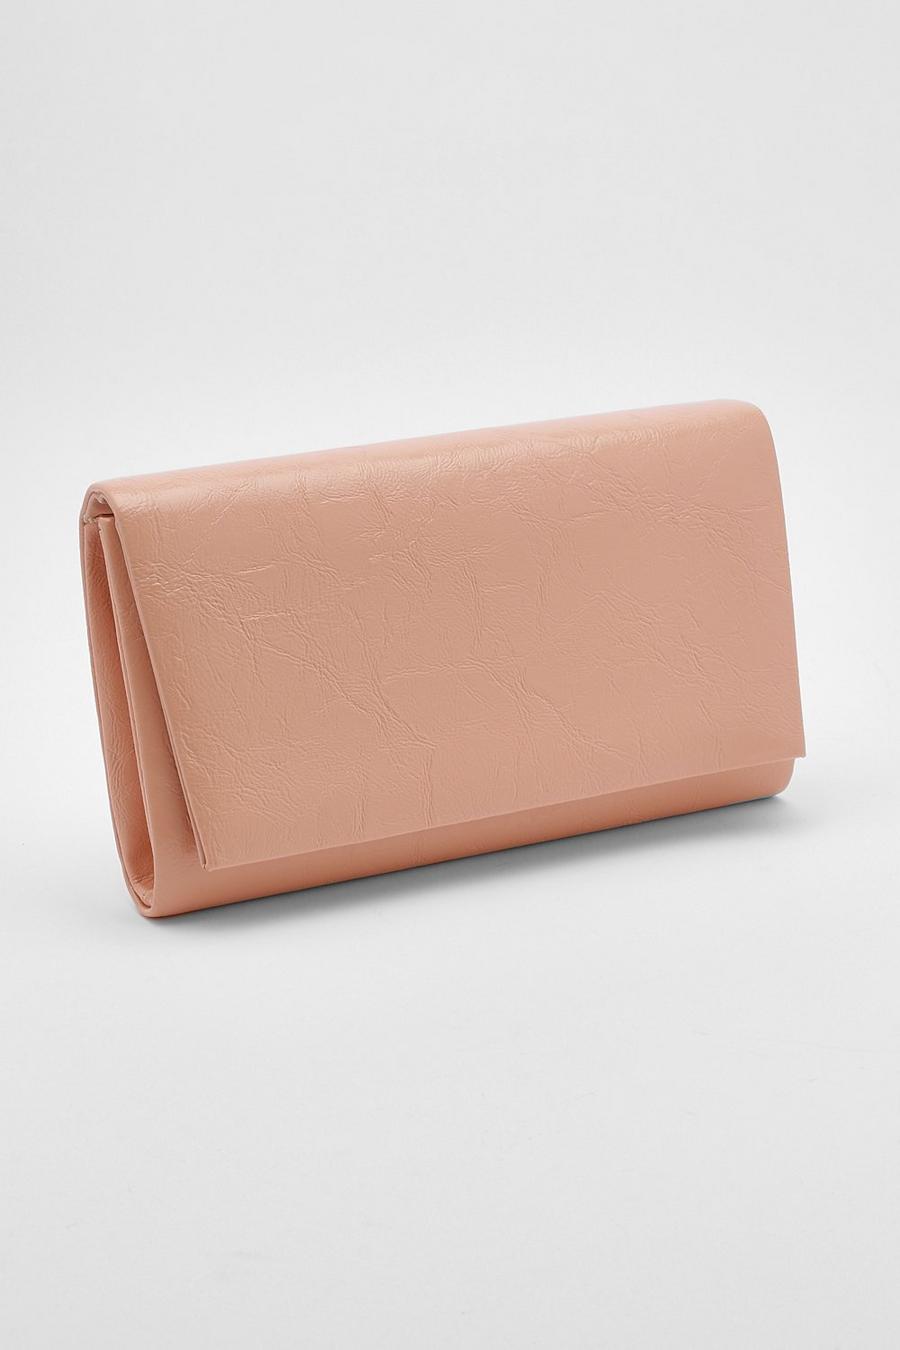 Nude Clutch with Insert - Women's Bags + Purses